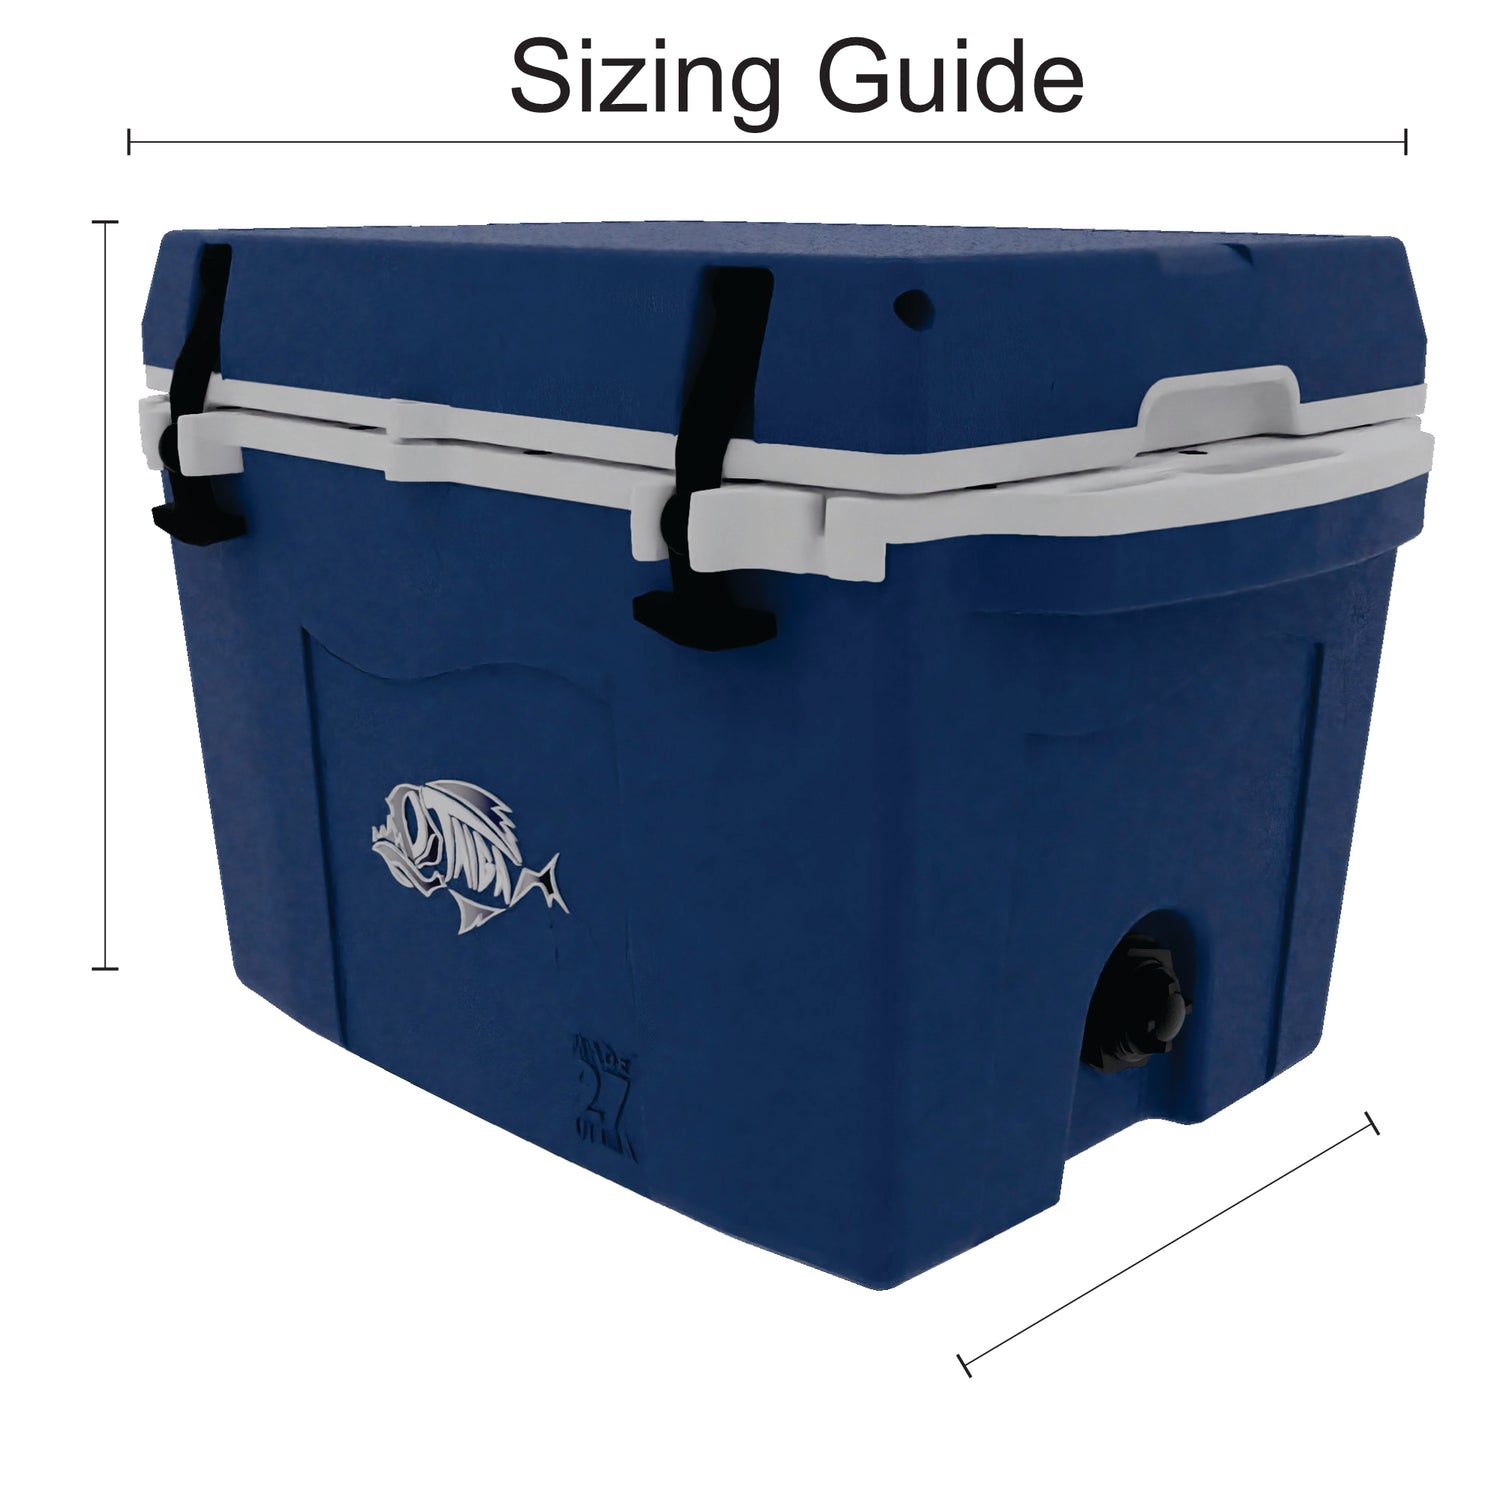 Cooler sizing guide